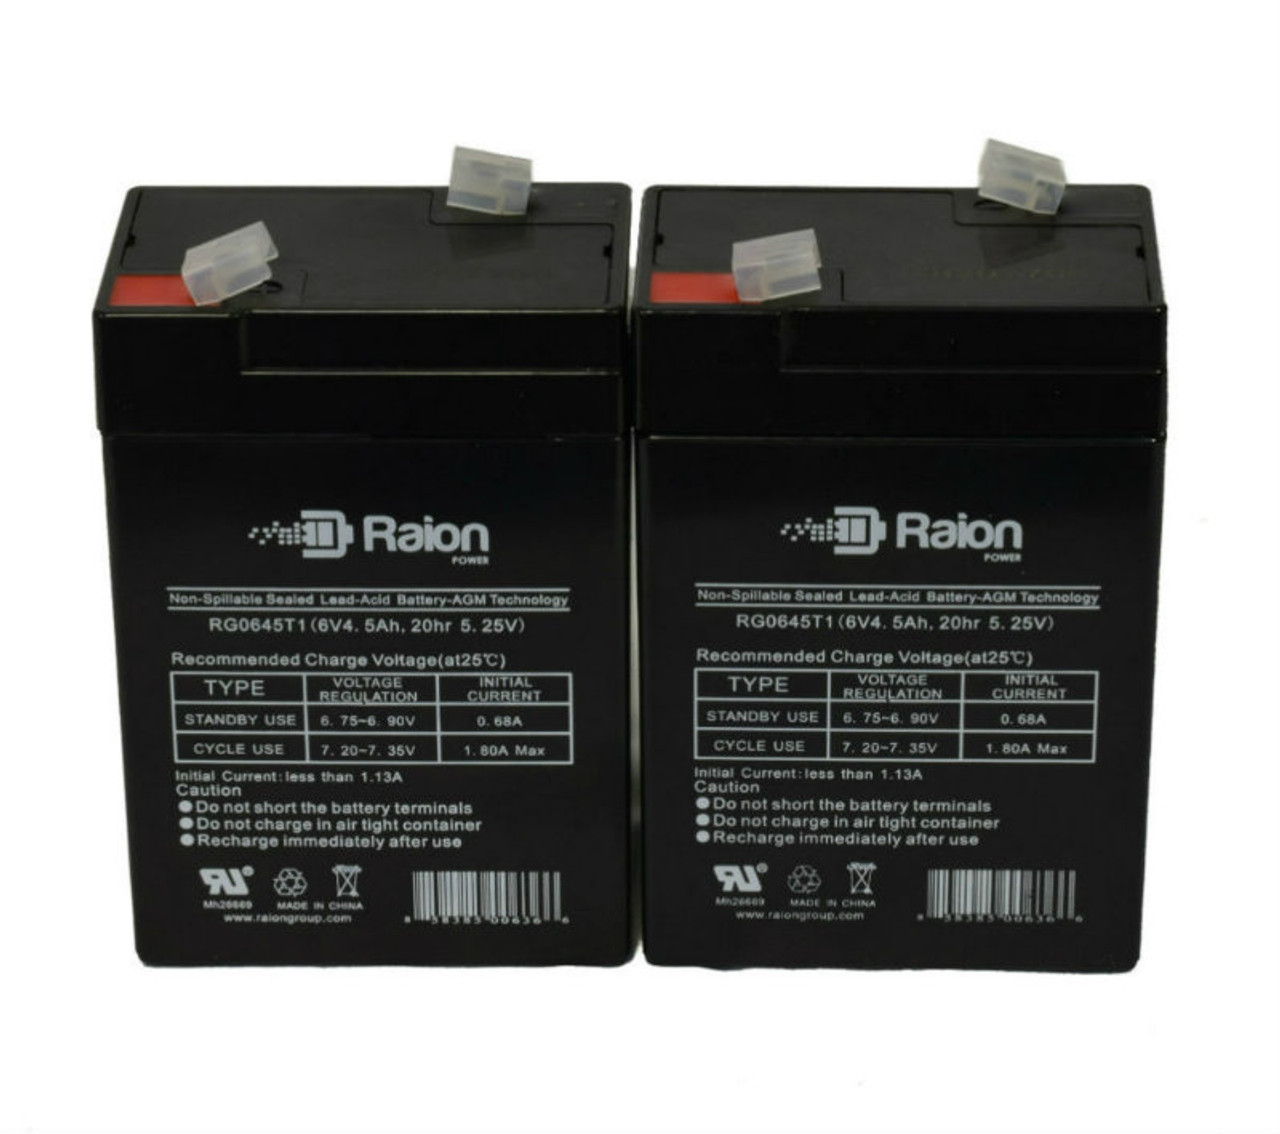 Raion Power 6V 4.5Ah Replacement Emergency Light Battery for Edwards 1663B - 2 Pack